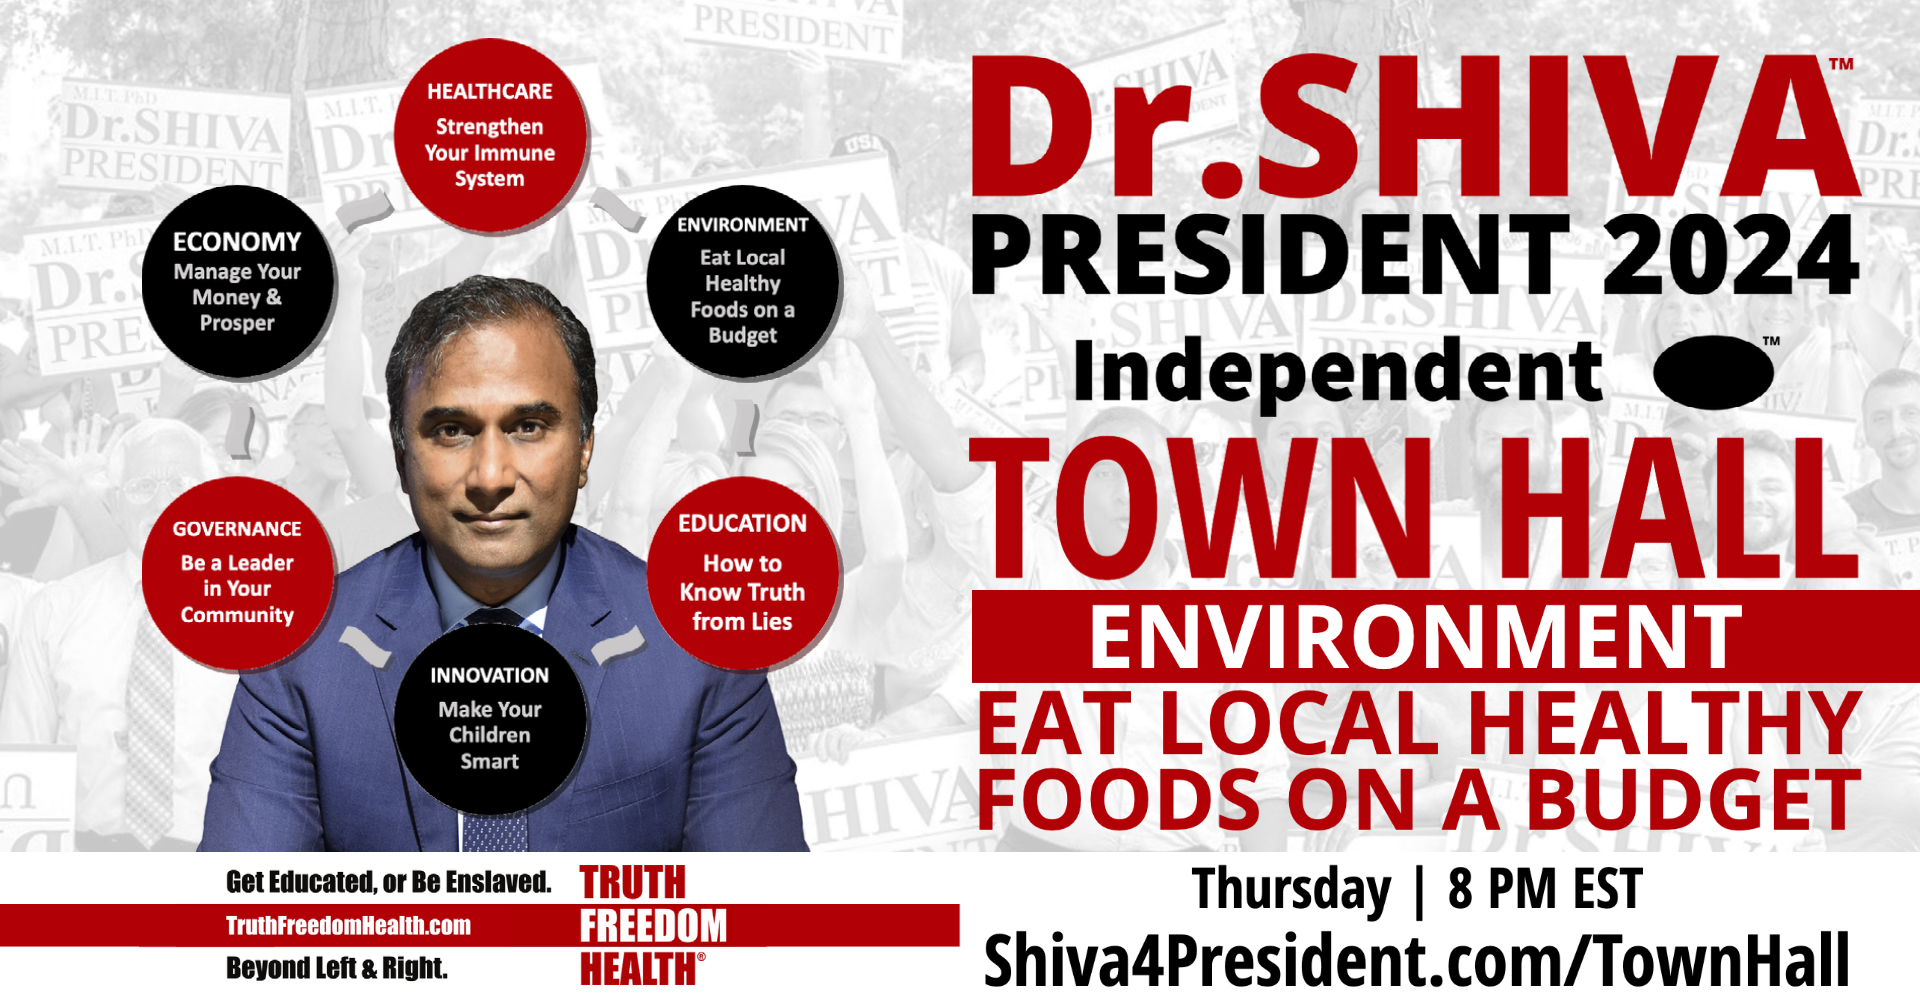 Dr.SHIVA: Town Hall - Environment: Eat Local Healthy Foods on a Budget